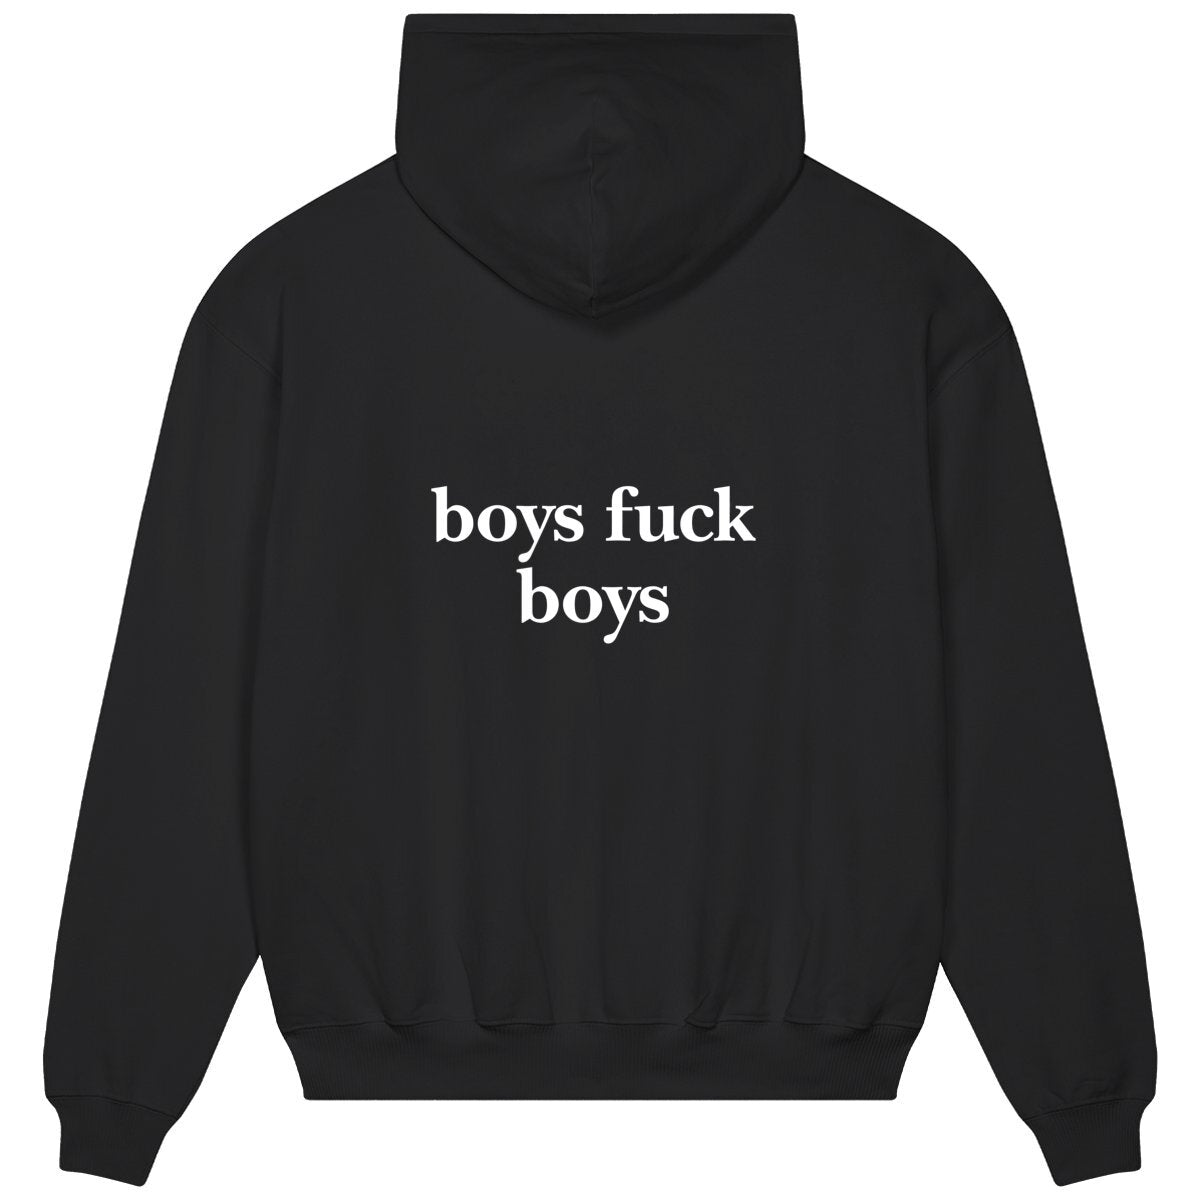 boys fuck boys hoodie over. garçon garçon essentiel black oversized hoodie. Encapsulate effortless Parisian cool with this hoodie, its subtle 'boys fuck boys ON THE BACK' emblem whispering understated sophistication. Crafted for comfort, styled for streets of Paris.